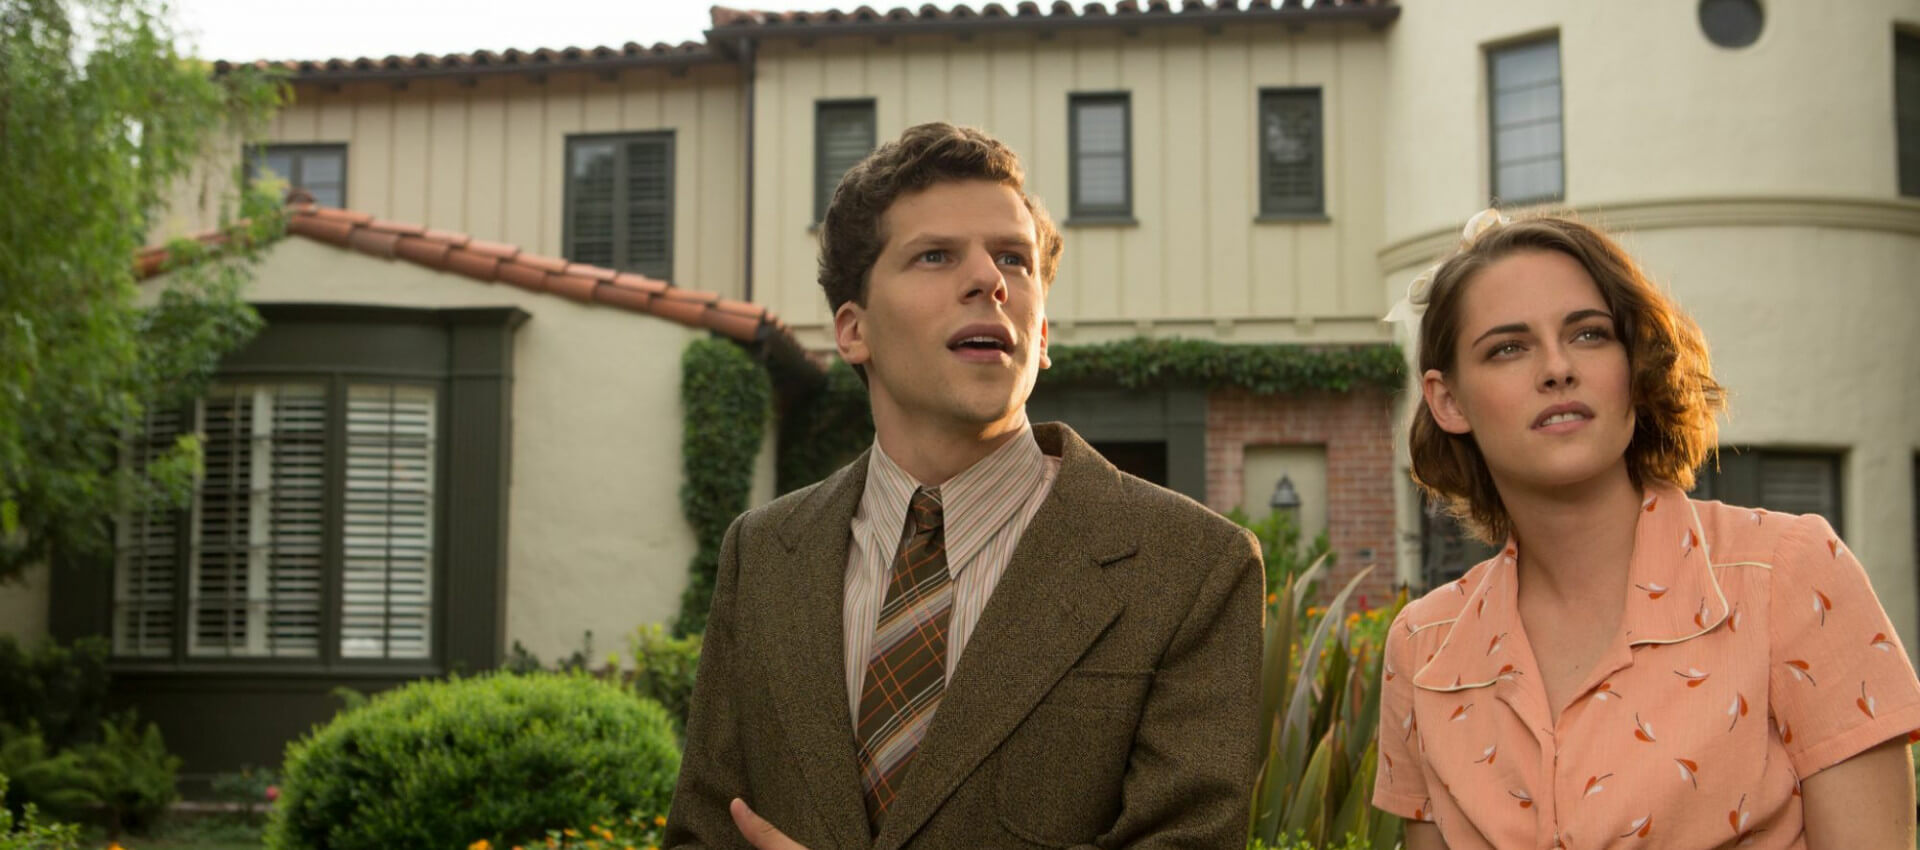 Woody Allen Move Screening: 'Café Society', Palace of Arts Budapest, 17 June